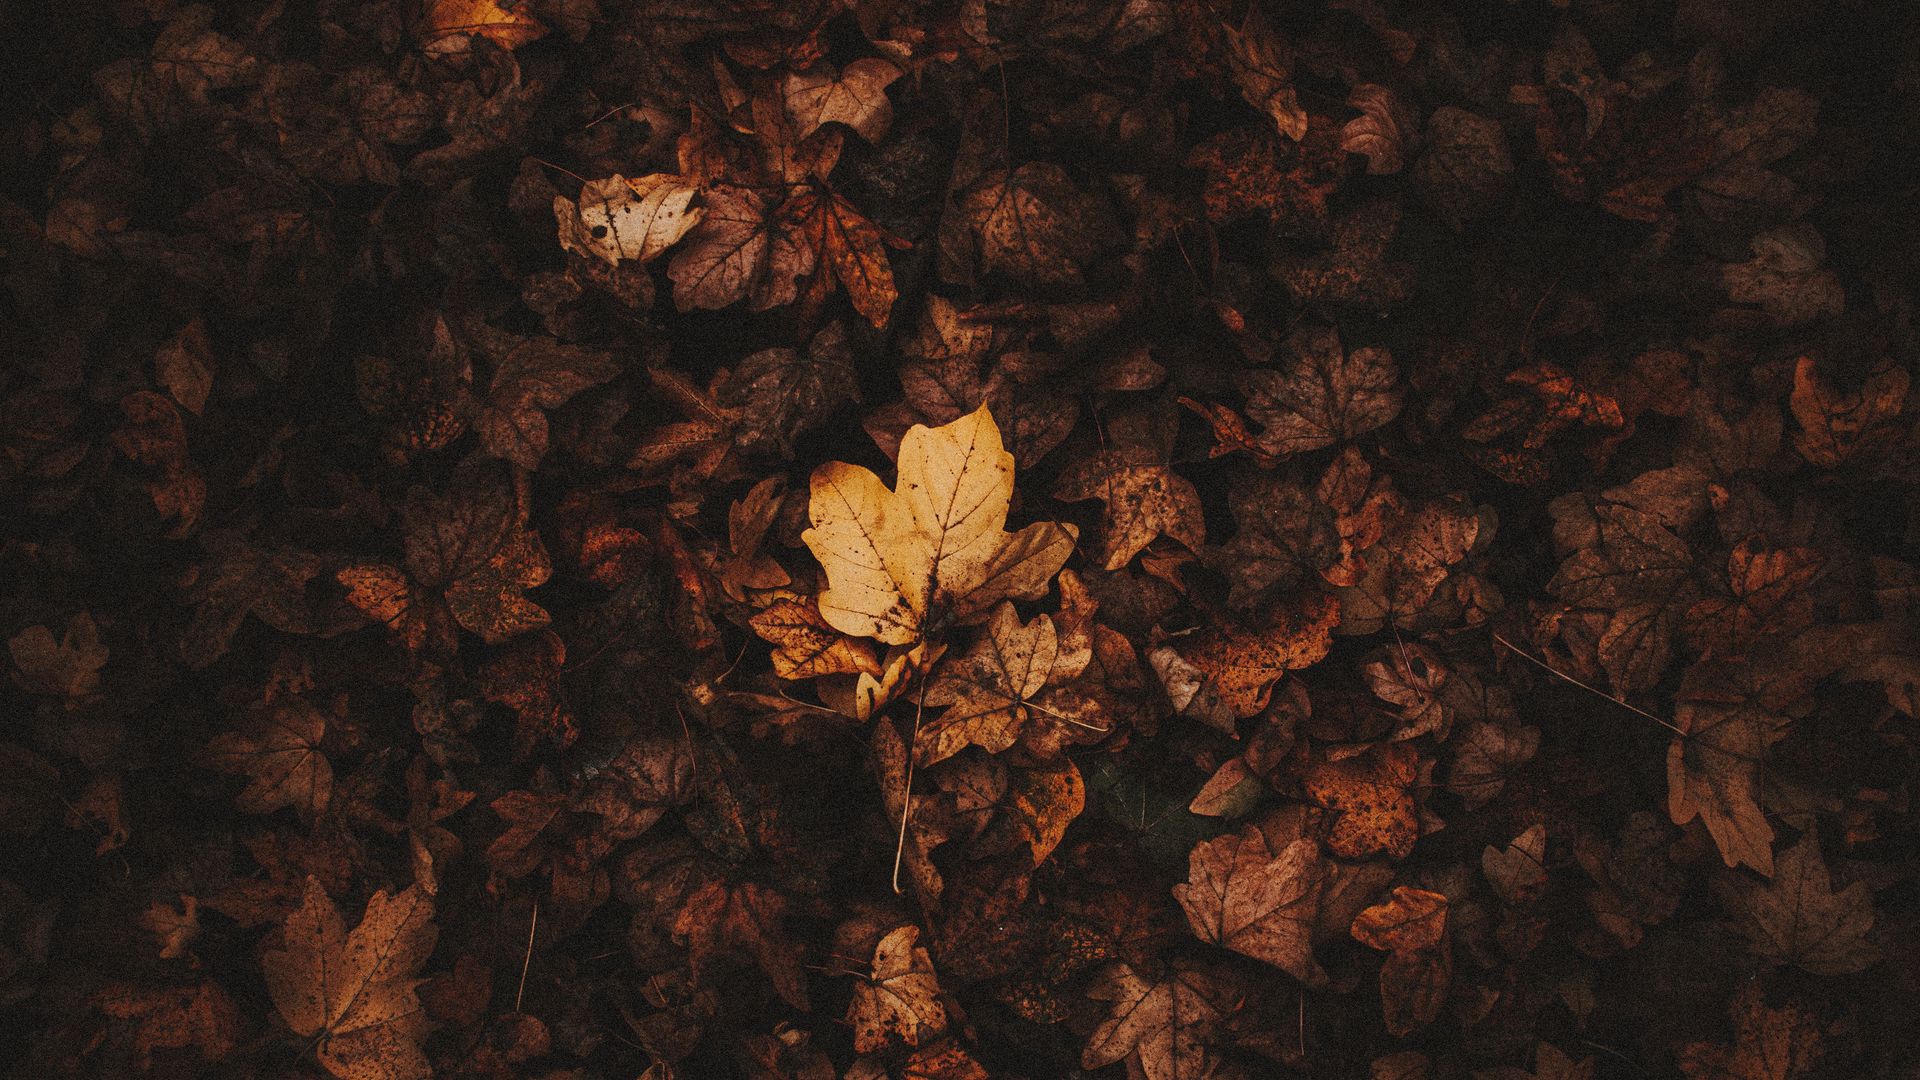 Download wallpaper 1920x1080 fallen leaves, leaves, autumn, brown, dry ...